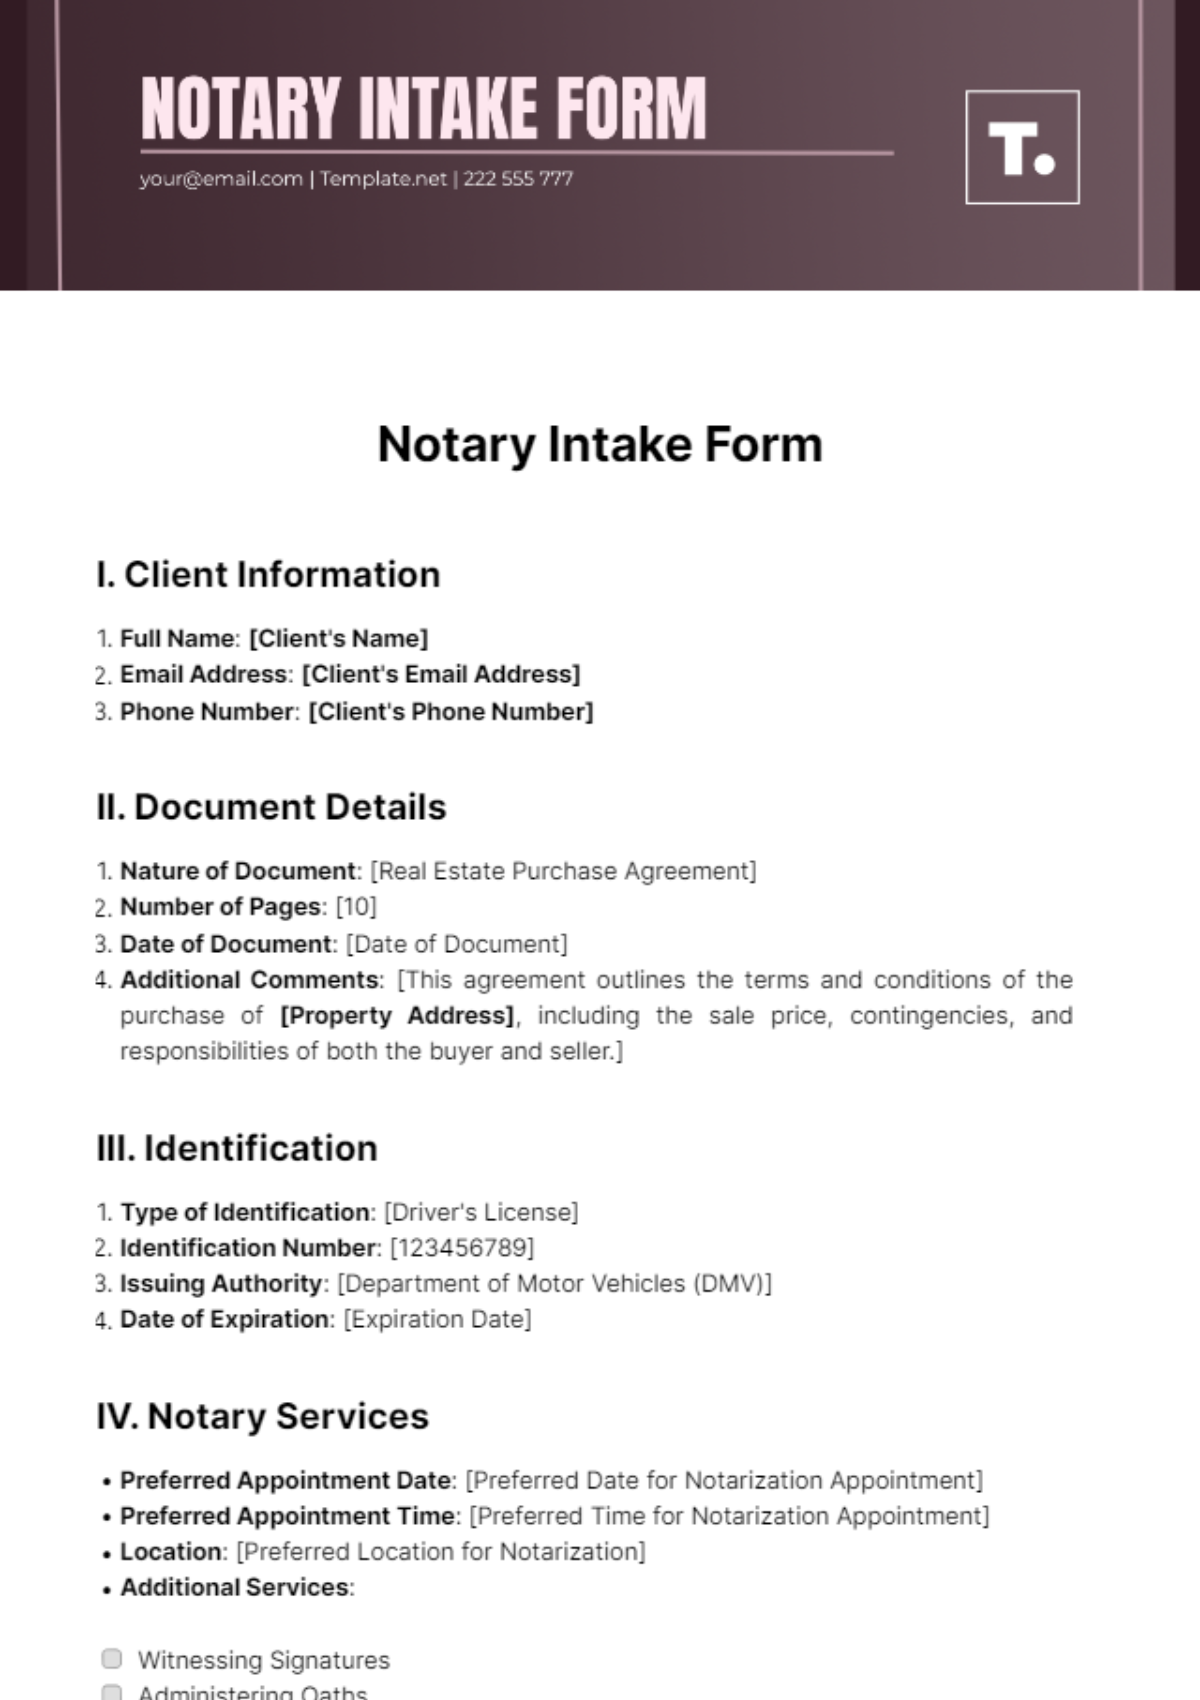 Notary Intake Form Template